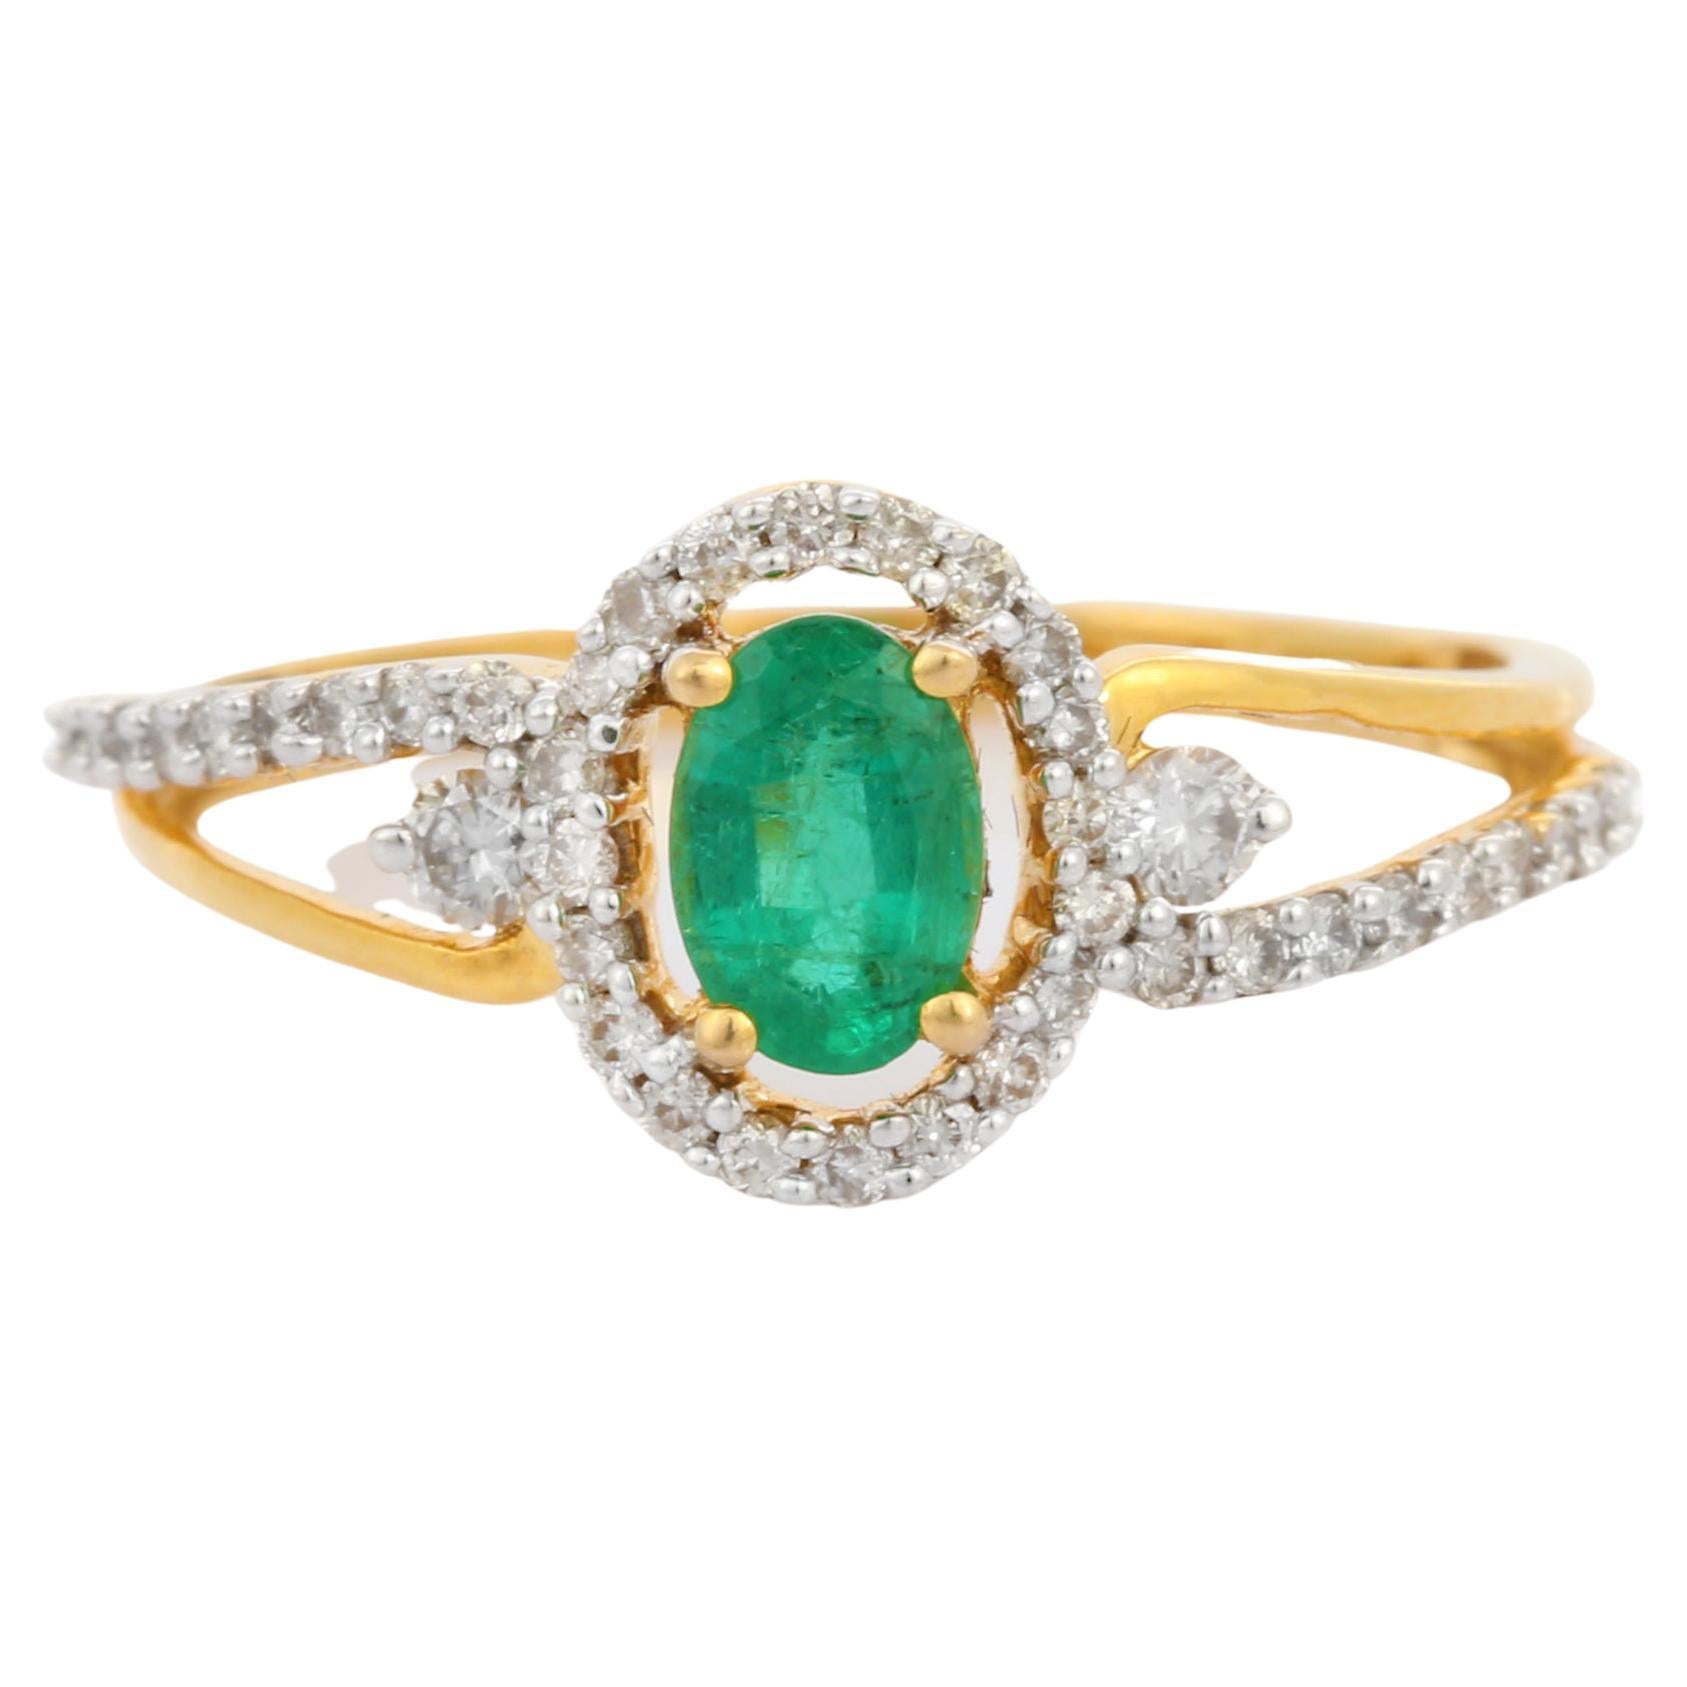 For Sale:  Solid 18k Yellow Gold Classic Emerald Engagement Ring with Diamonds